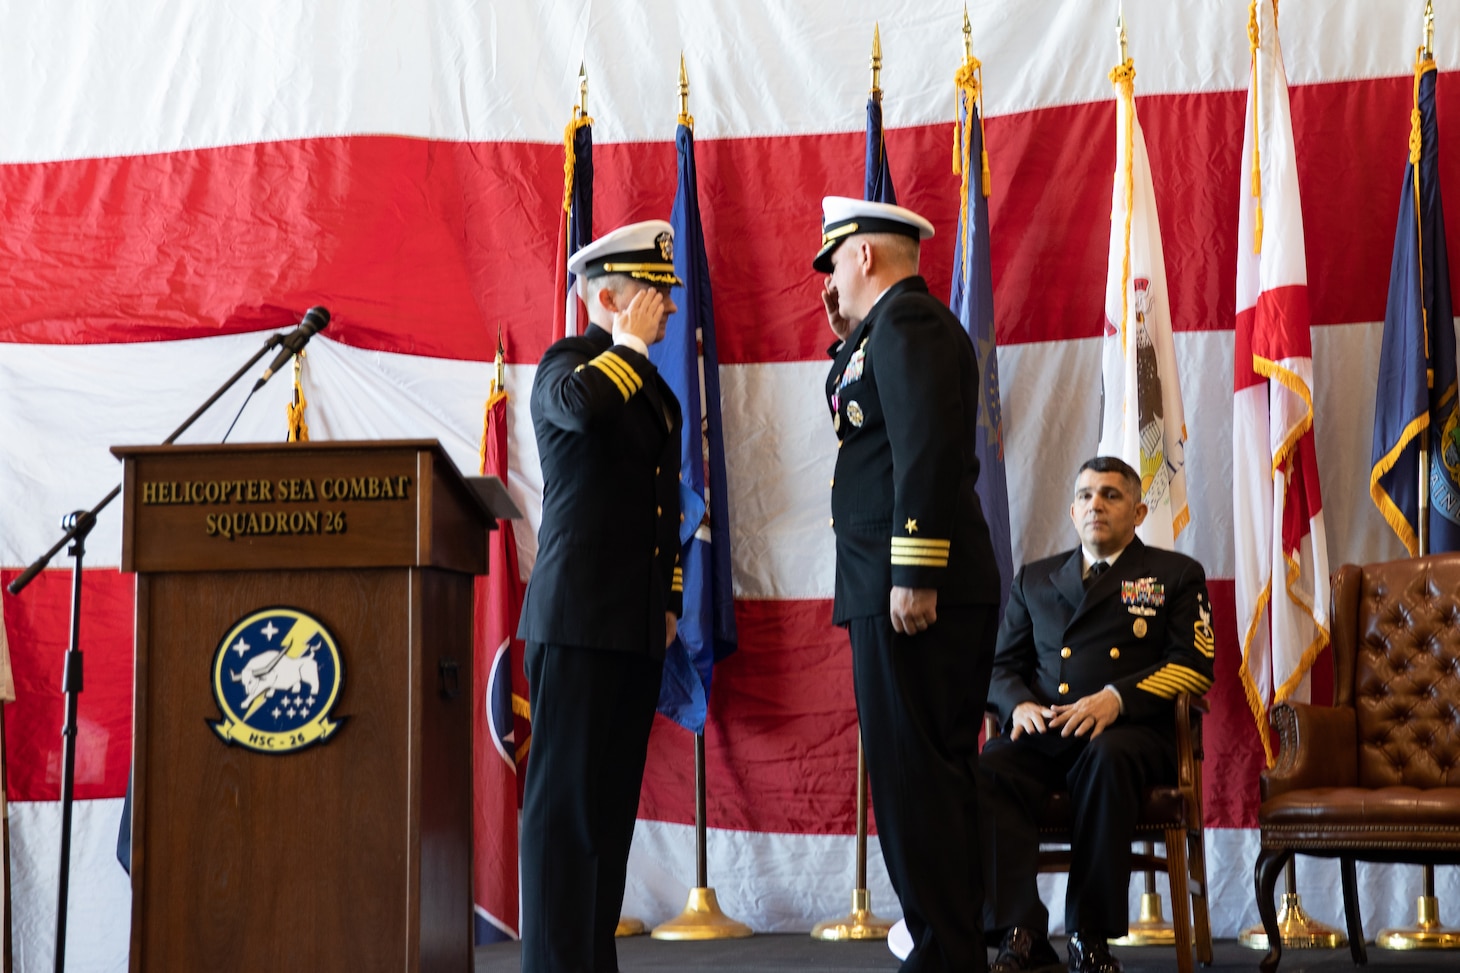 HSC-26 Change of Command